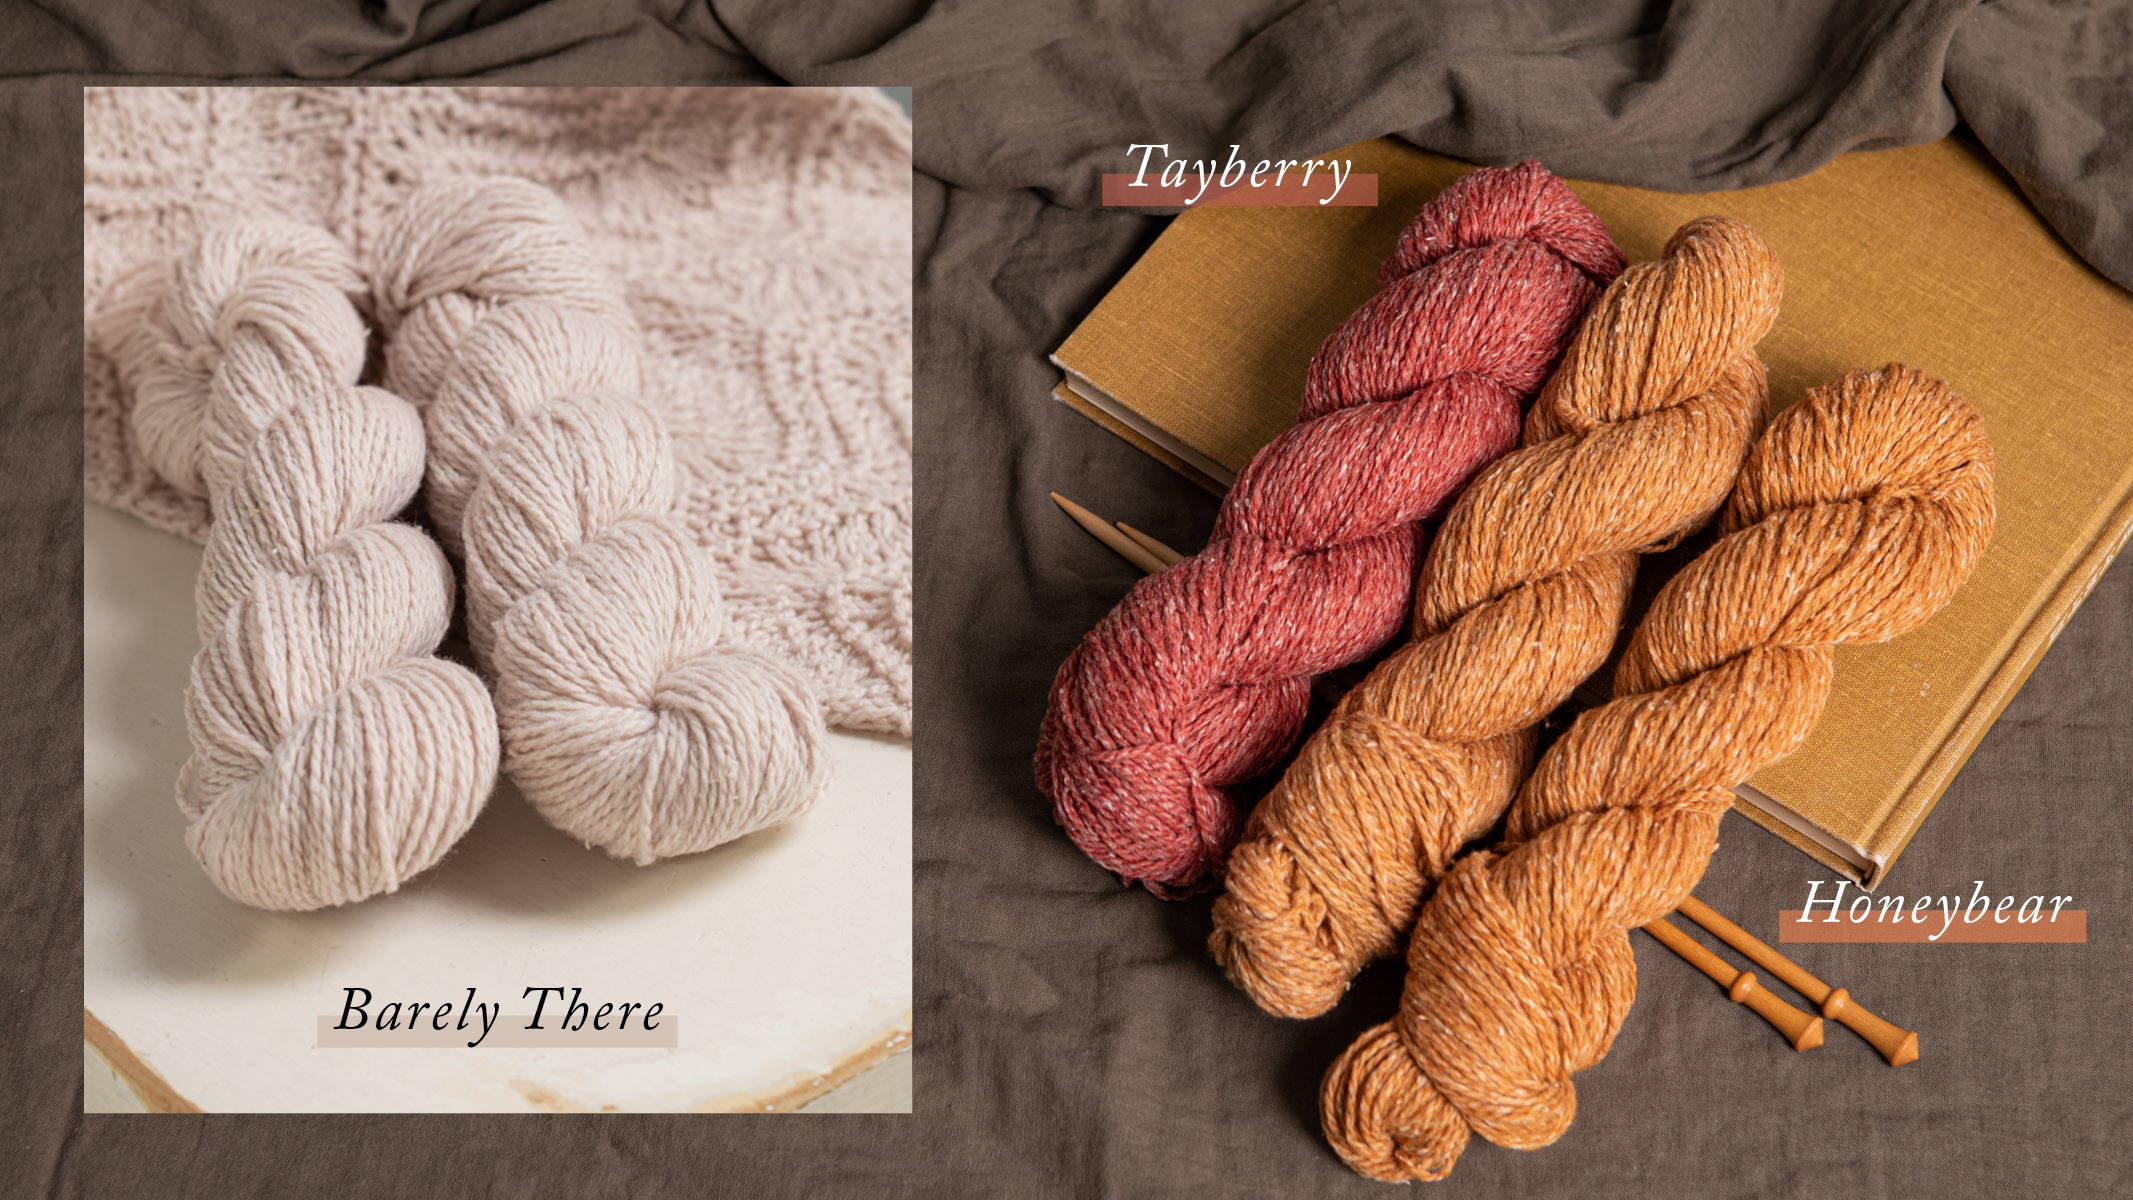 Right image: three skeins of wool & cotton blended yarn in colors Honeybear and Tayberry laying over adark mustard colored book and knitting needles. Left: Two skeins of Dapple color Barely There sitting on a weathered chair with a knitted baby blanket in the same color.